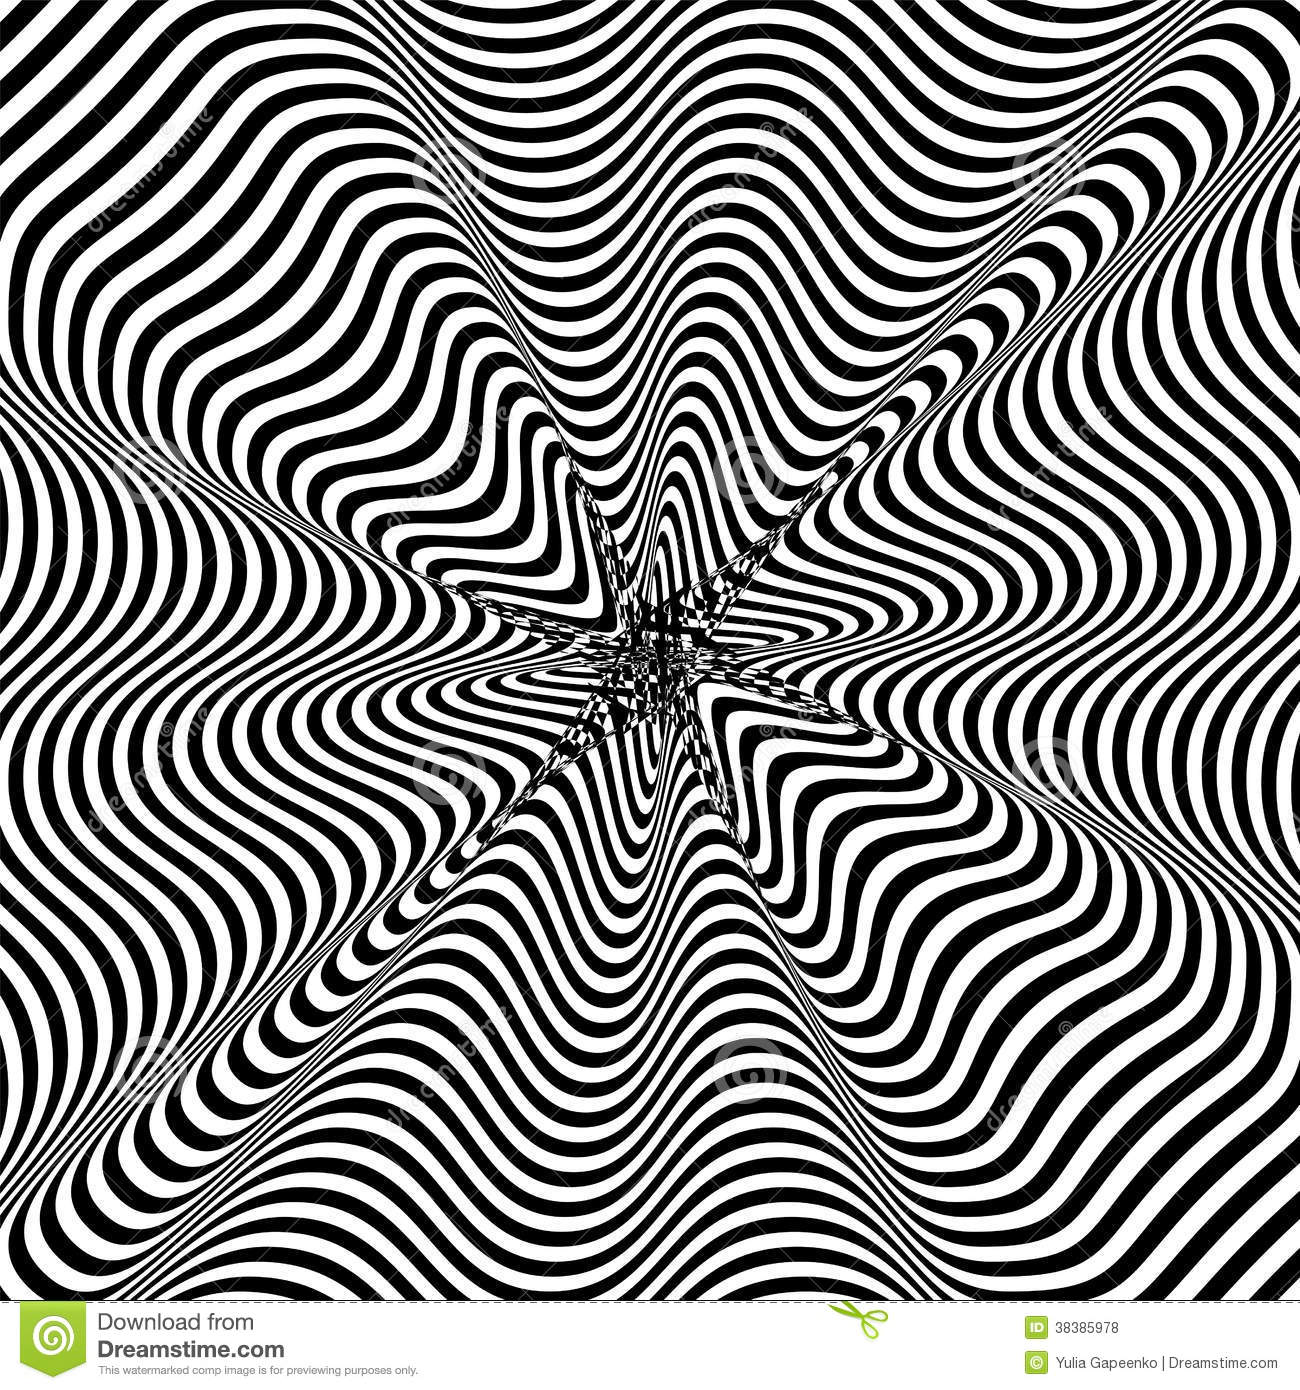 Hypnotic Black and White Vector Background